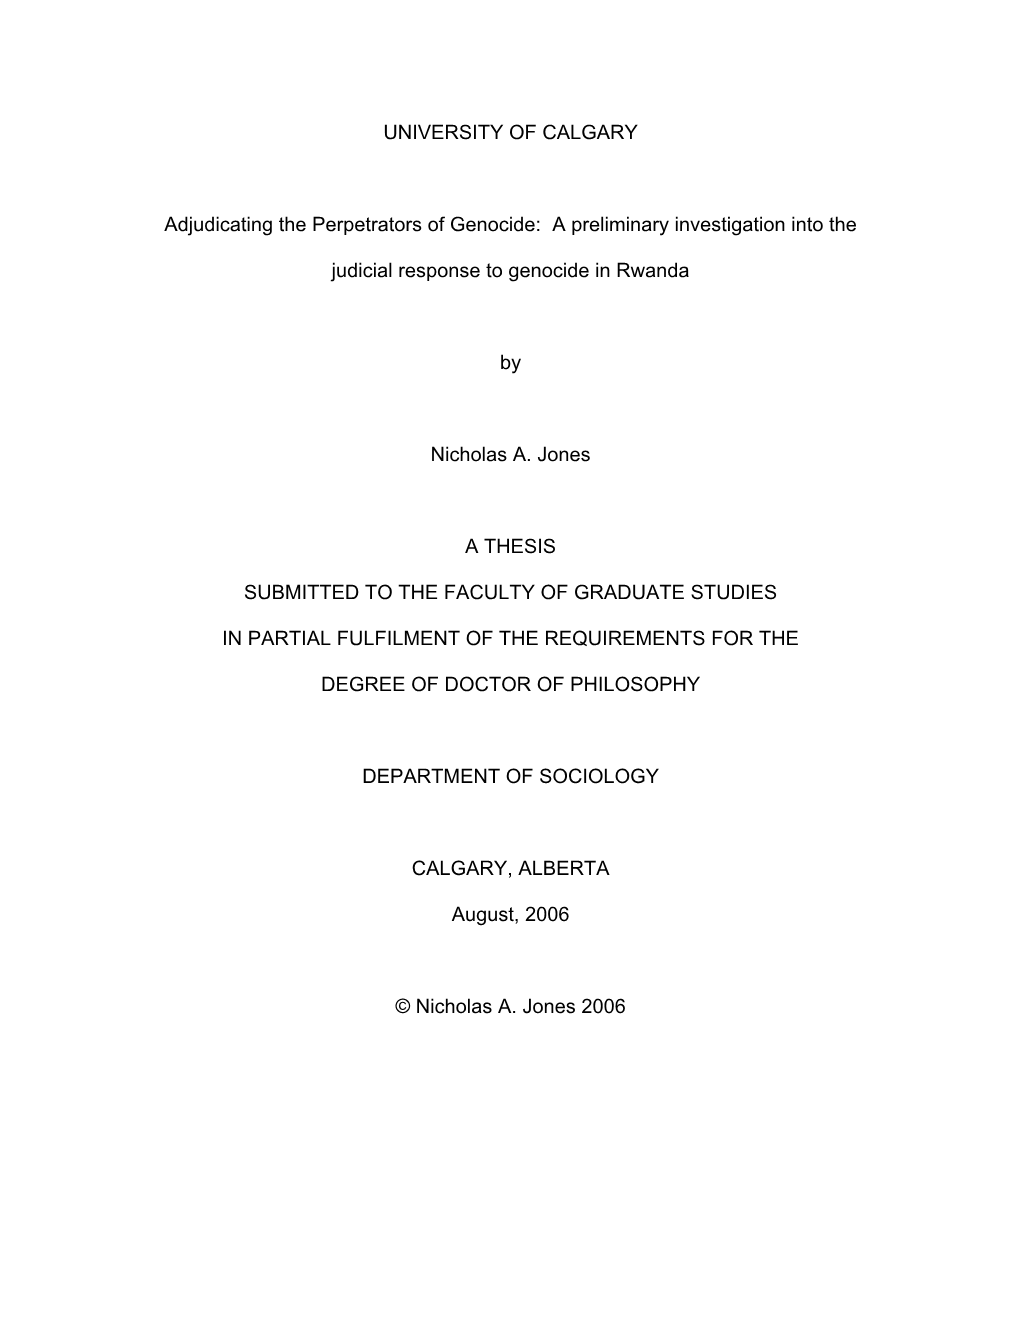 Adjudicating the Perpetrators of Genocide: a Preliminary Investigation Into The